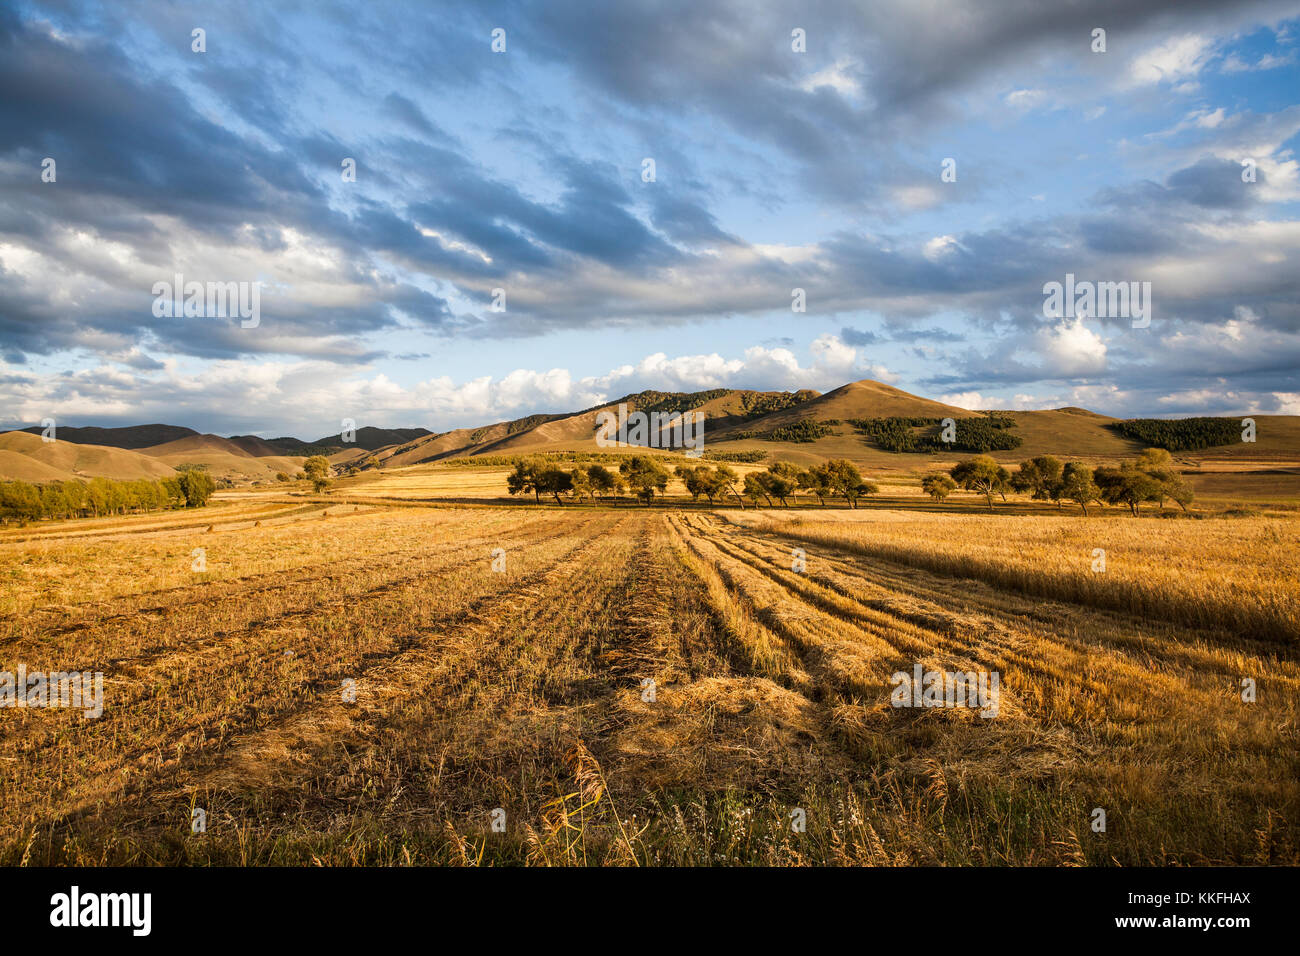 Rural scenery in Inner Mongolia province, China Stock Photo